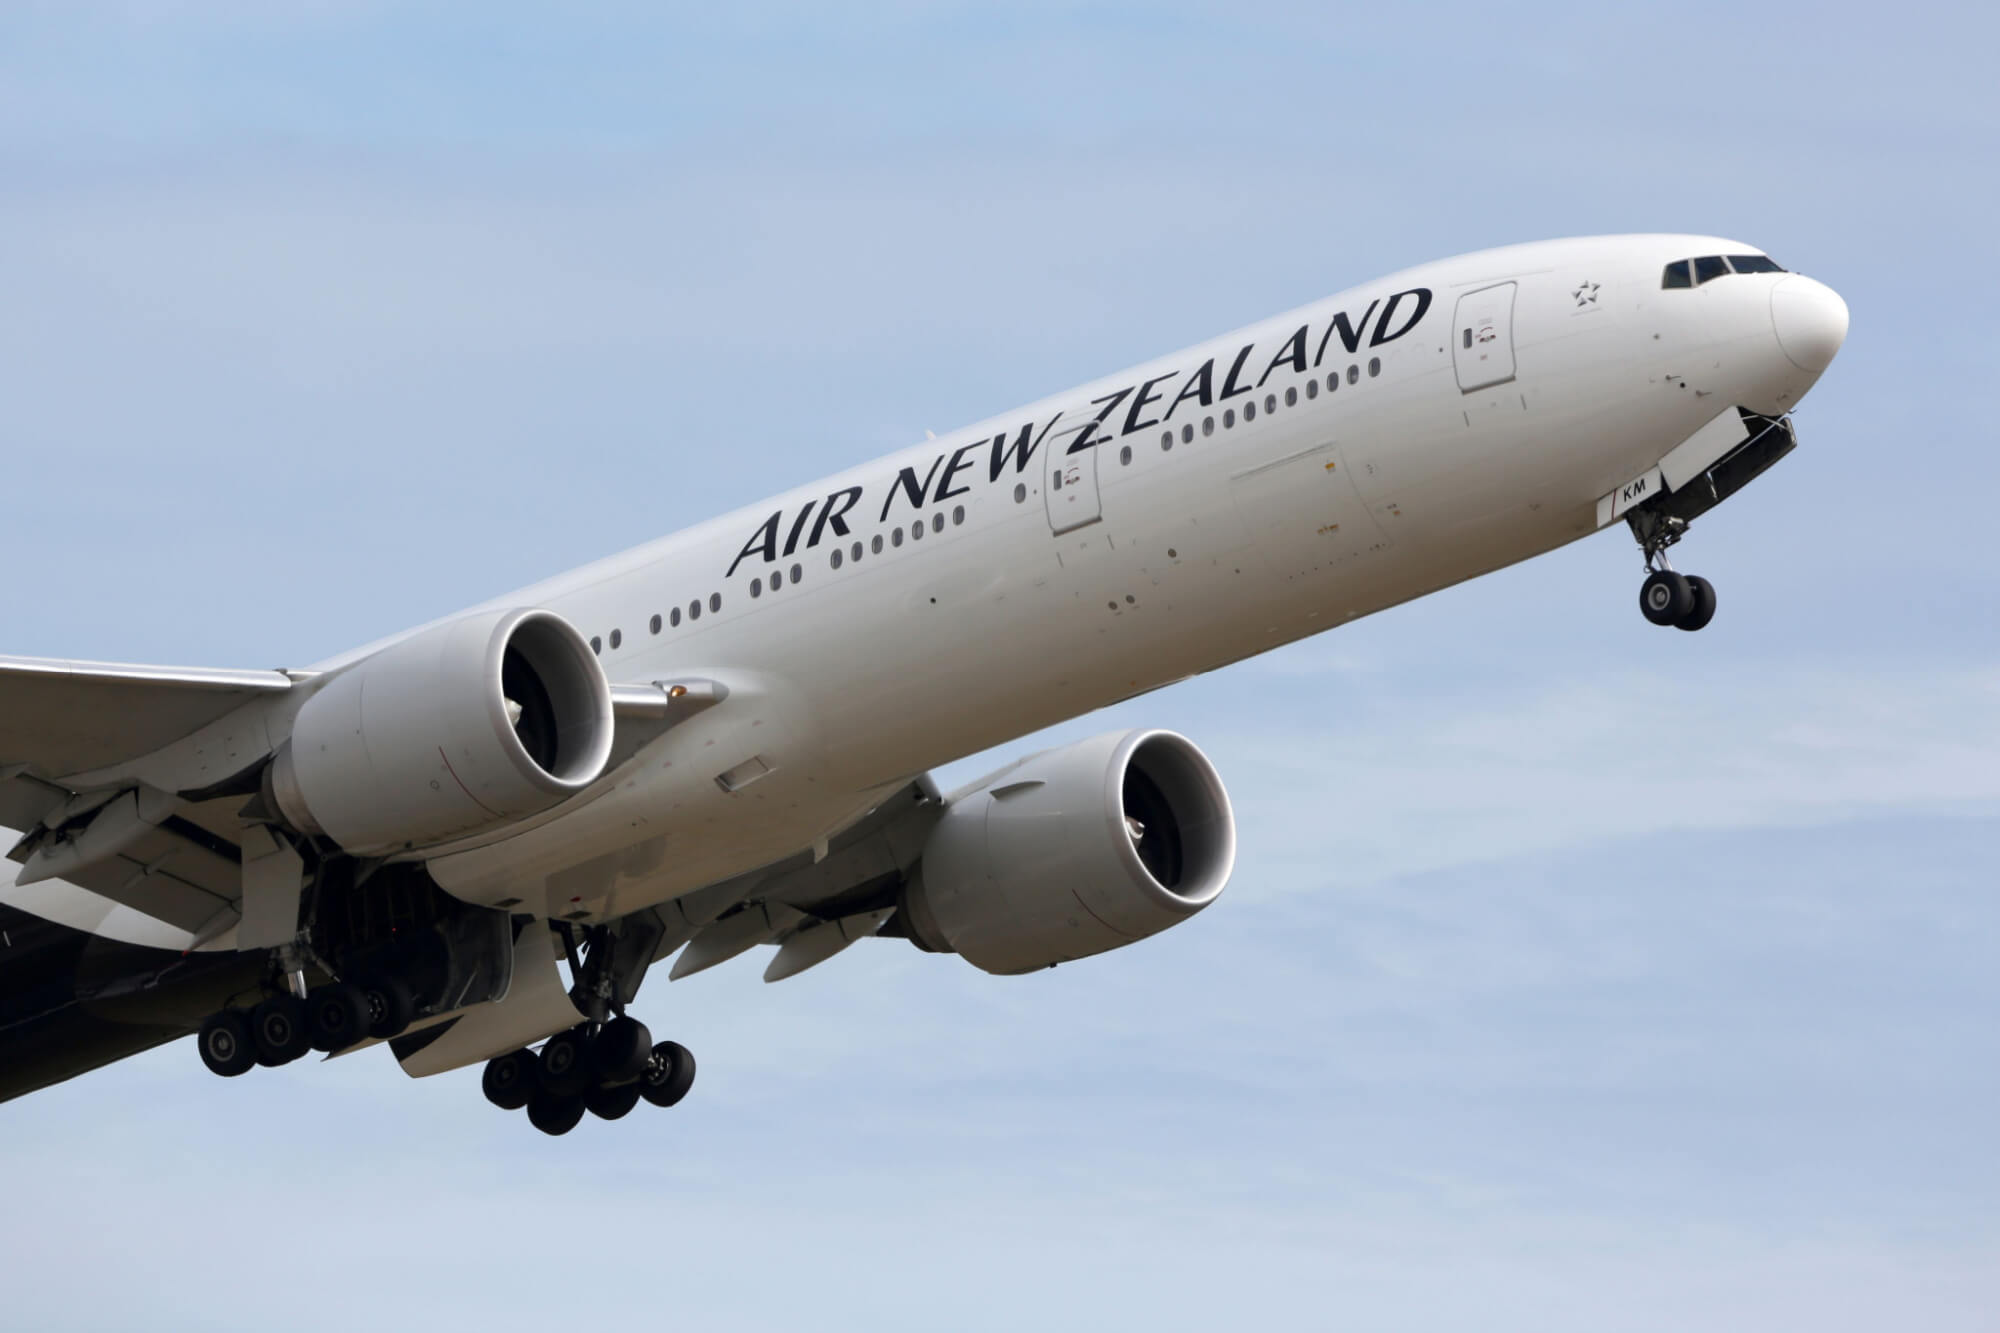 Air New Zealand Boeing 777-300ER taking off